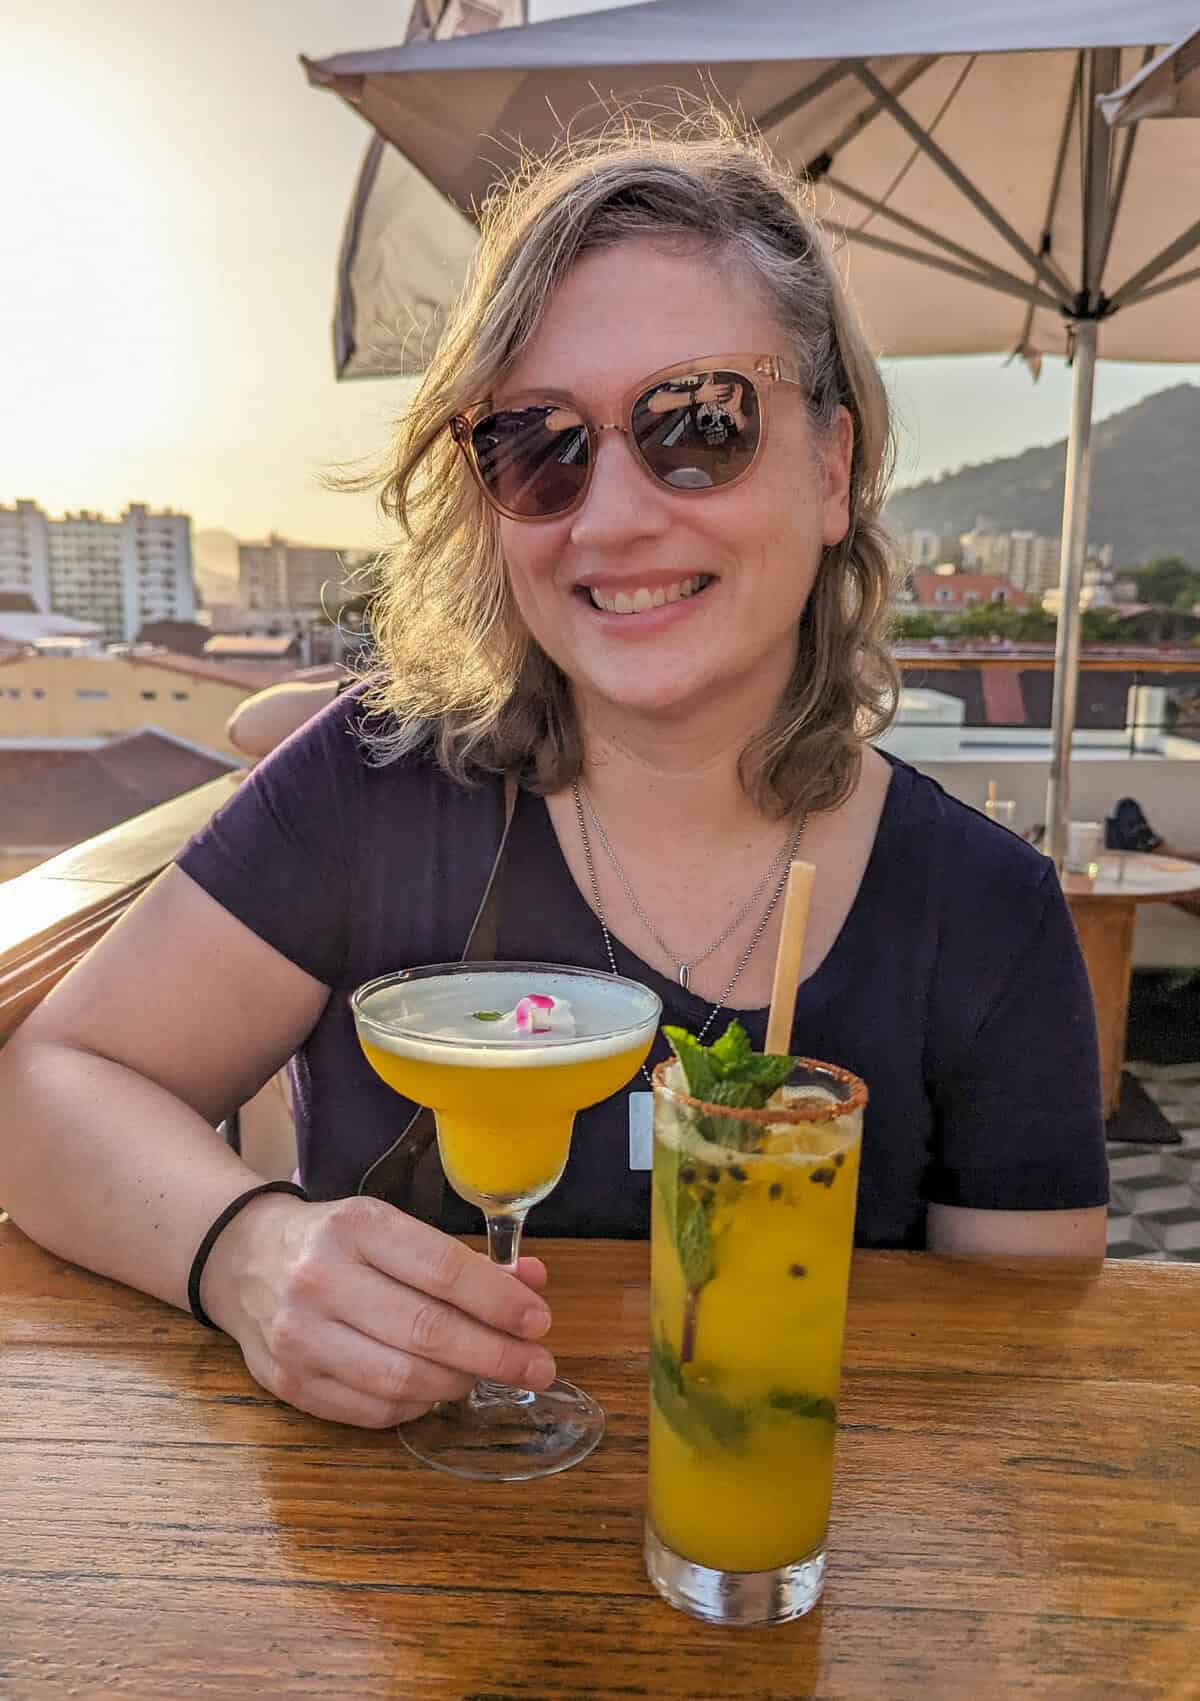 Dalene enjoying a cocktail on a rooftop patio in Panama City